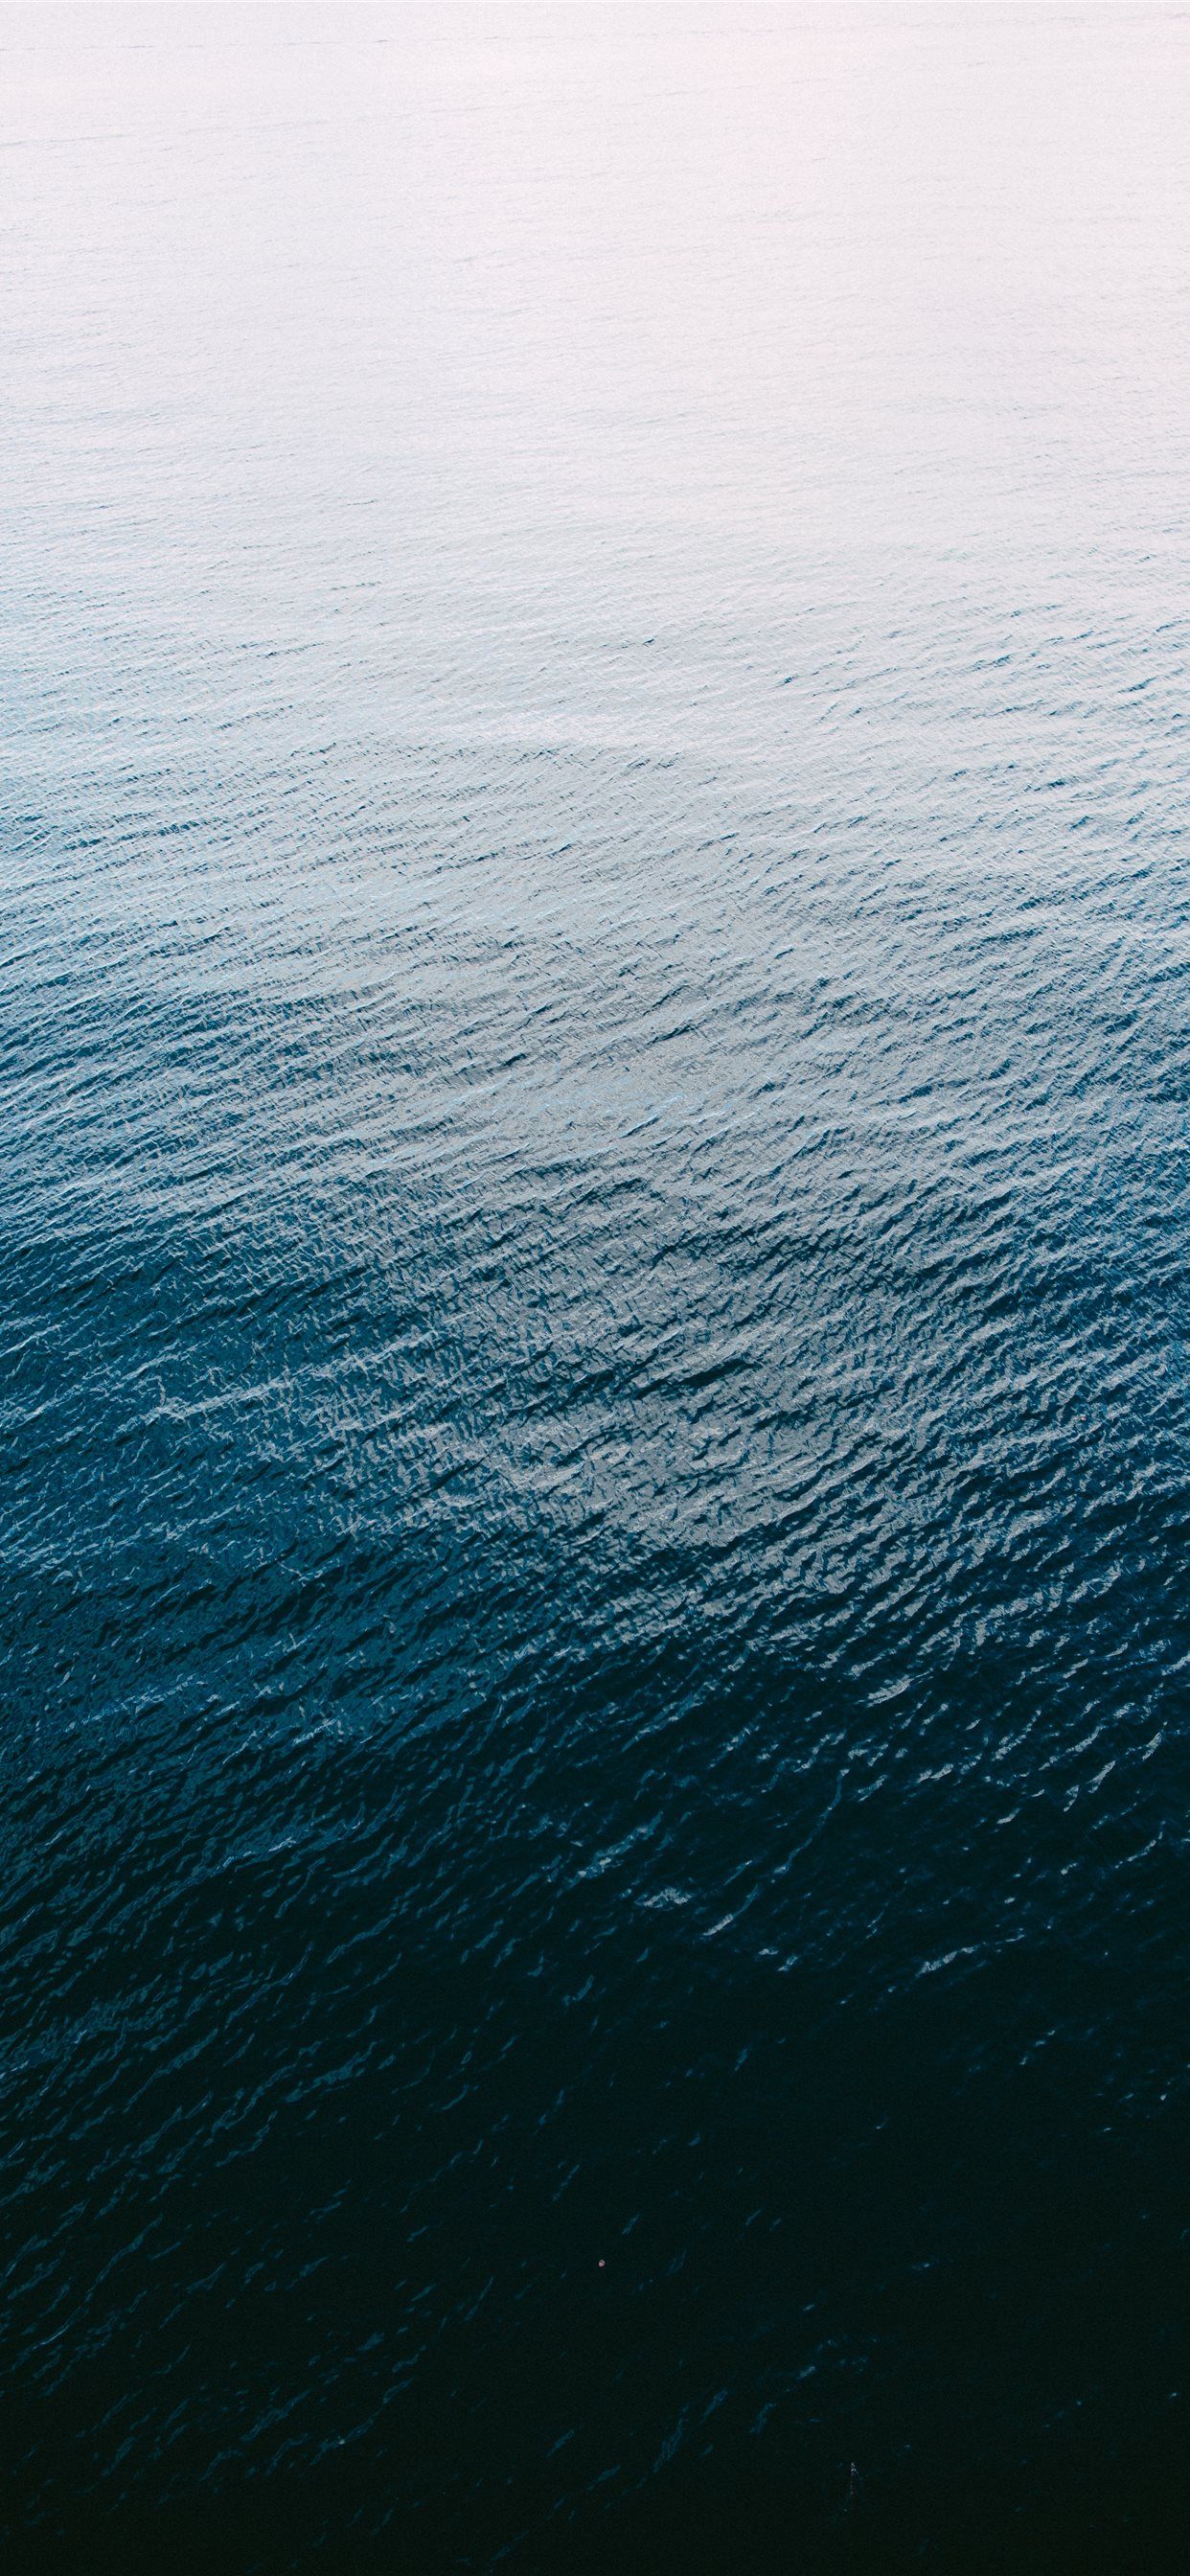 A shot of the Pacific Ocean from above iPhone Wallpaper Free Download